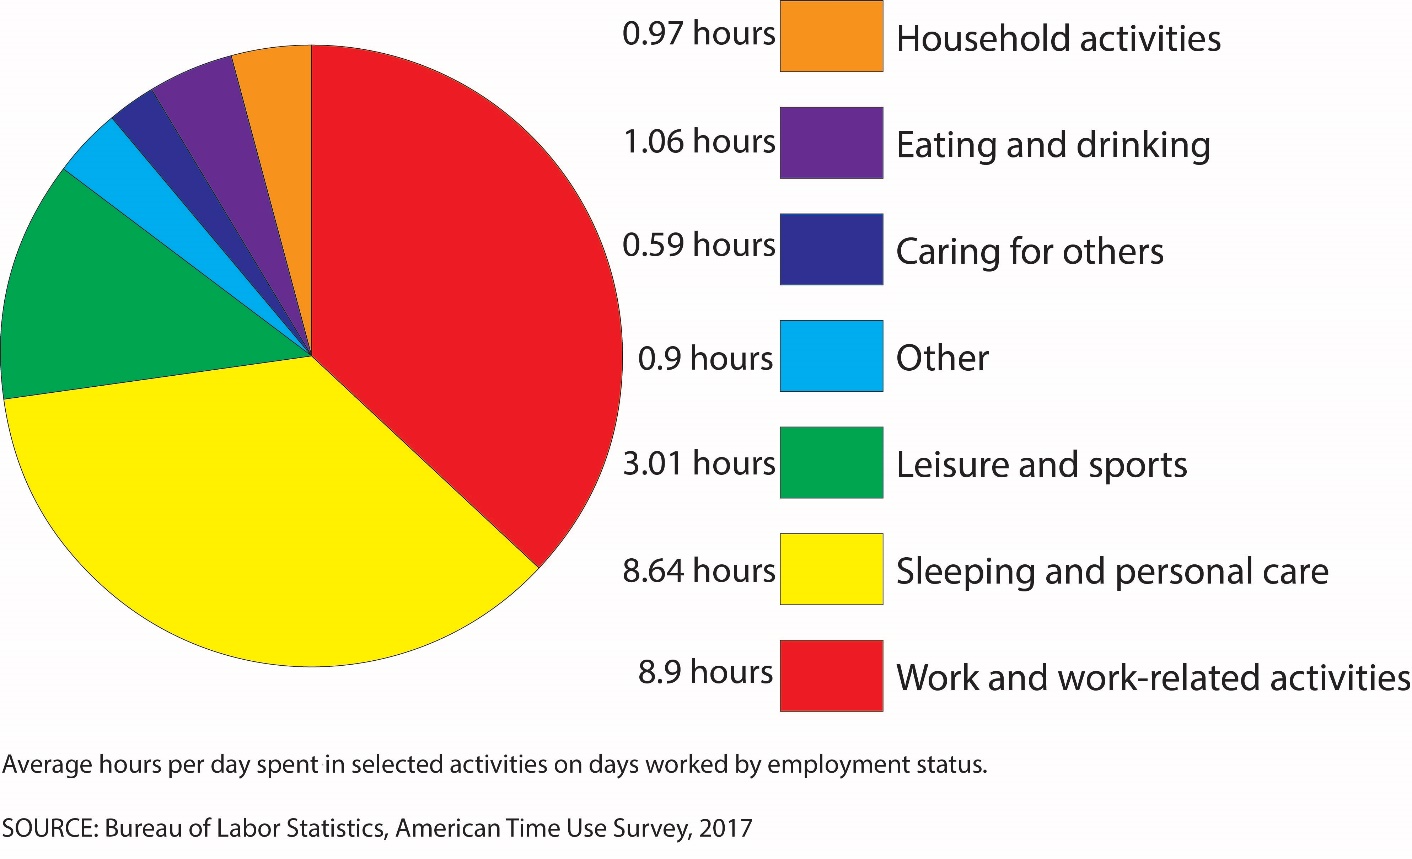 Average hours per day spent in selected activities on days worked by employment status: 0.97 hours: household activities 1.06 hours: Eating and drinking 0.59 hours: Caring for others 0.9 hours: Other 3.01 hours: Leisure and sports 8.64 hours: sleeping and personal care 8.9 hours: work and work-related activities.